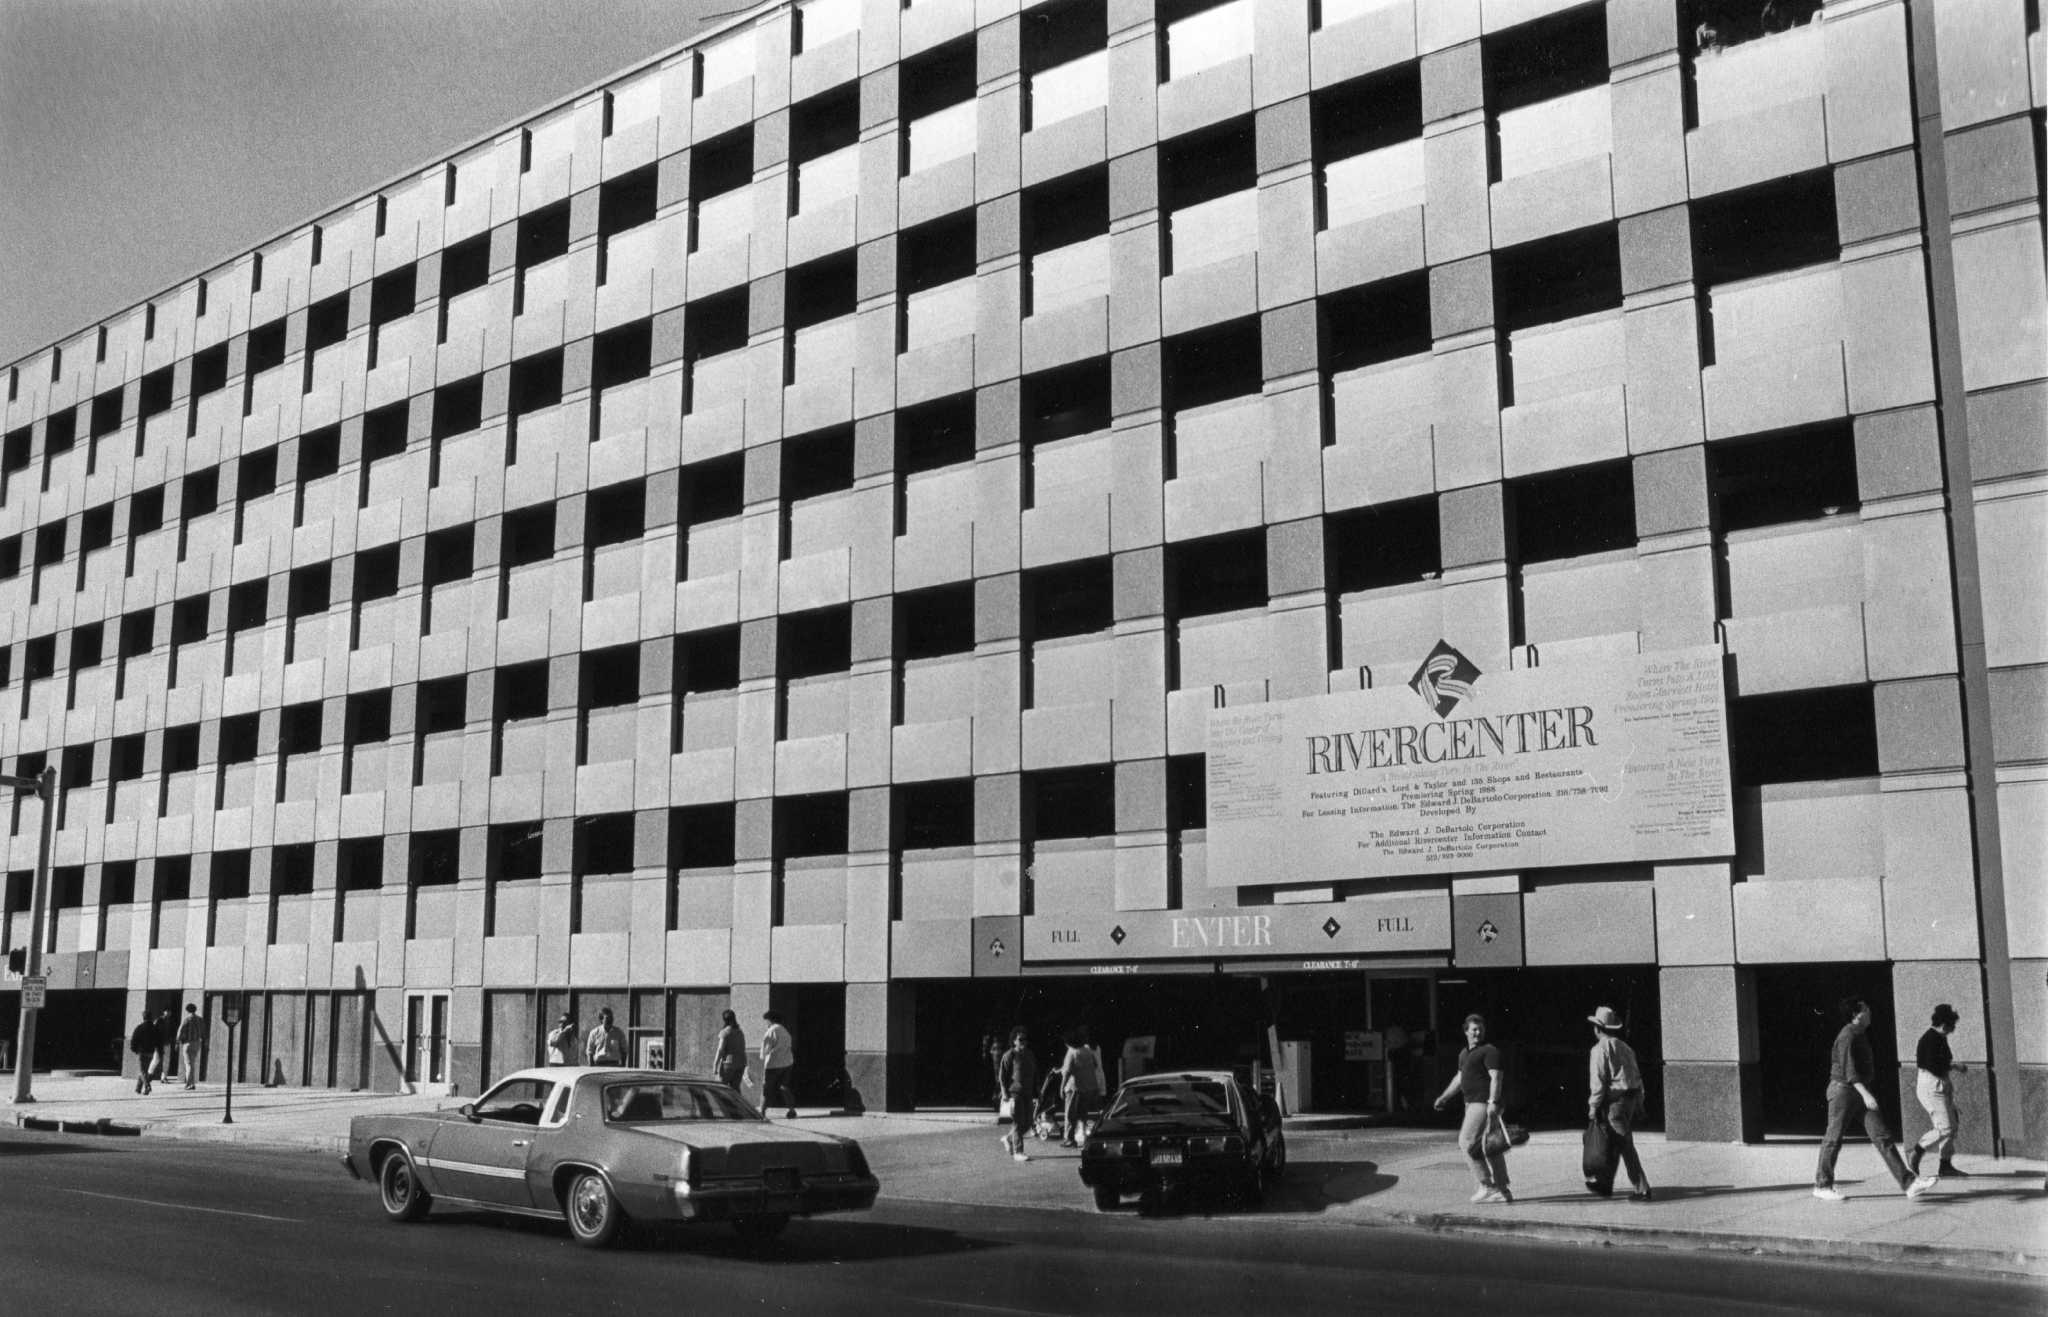 North Star Mall was '60 acres of shopping delight' when it opened its doors  in 1960